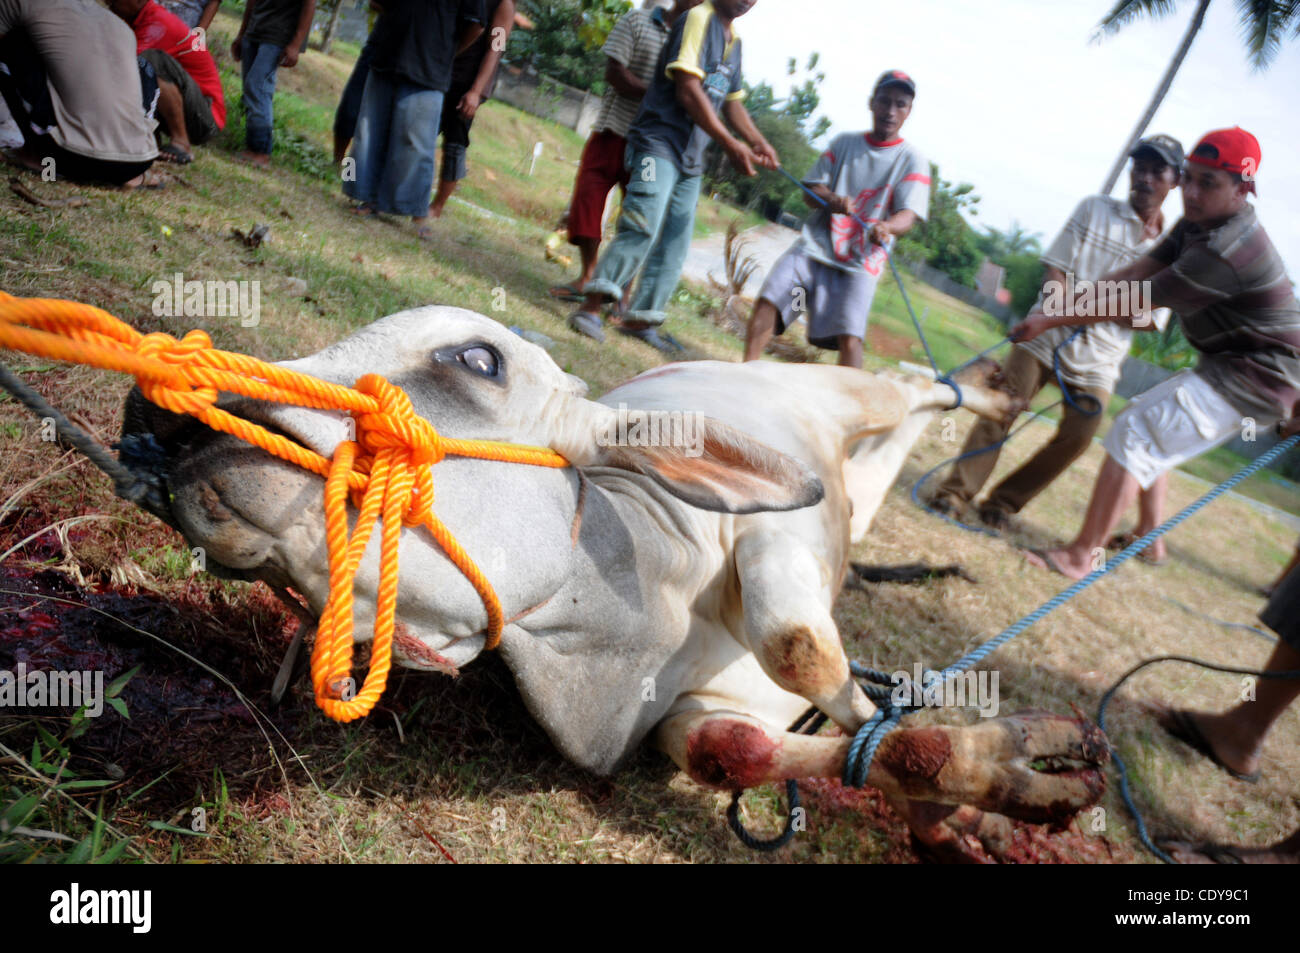 Nov. 6, 2011 - Depok, West Java, Indonesia - Indonesian muslims slaughter goats and cows amid recitation of prayers at Al Musabbihuun mosque during the celebration of Eid al-Adha, the feast of sacrifice in Depok, West Java. Islam's second biggest annual festival is celebrated by Muslims worldwide to Stock Photo